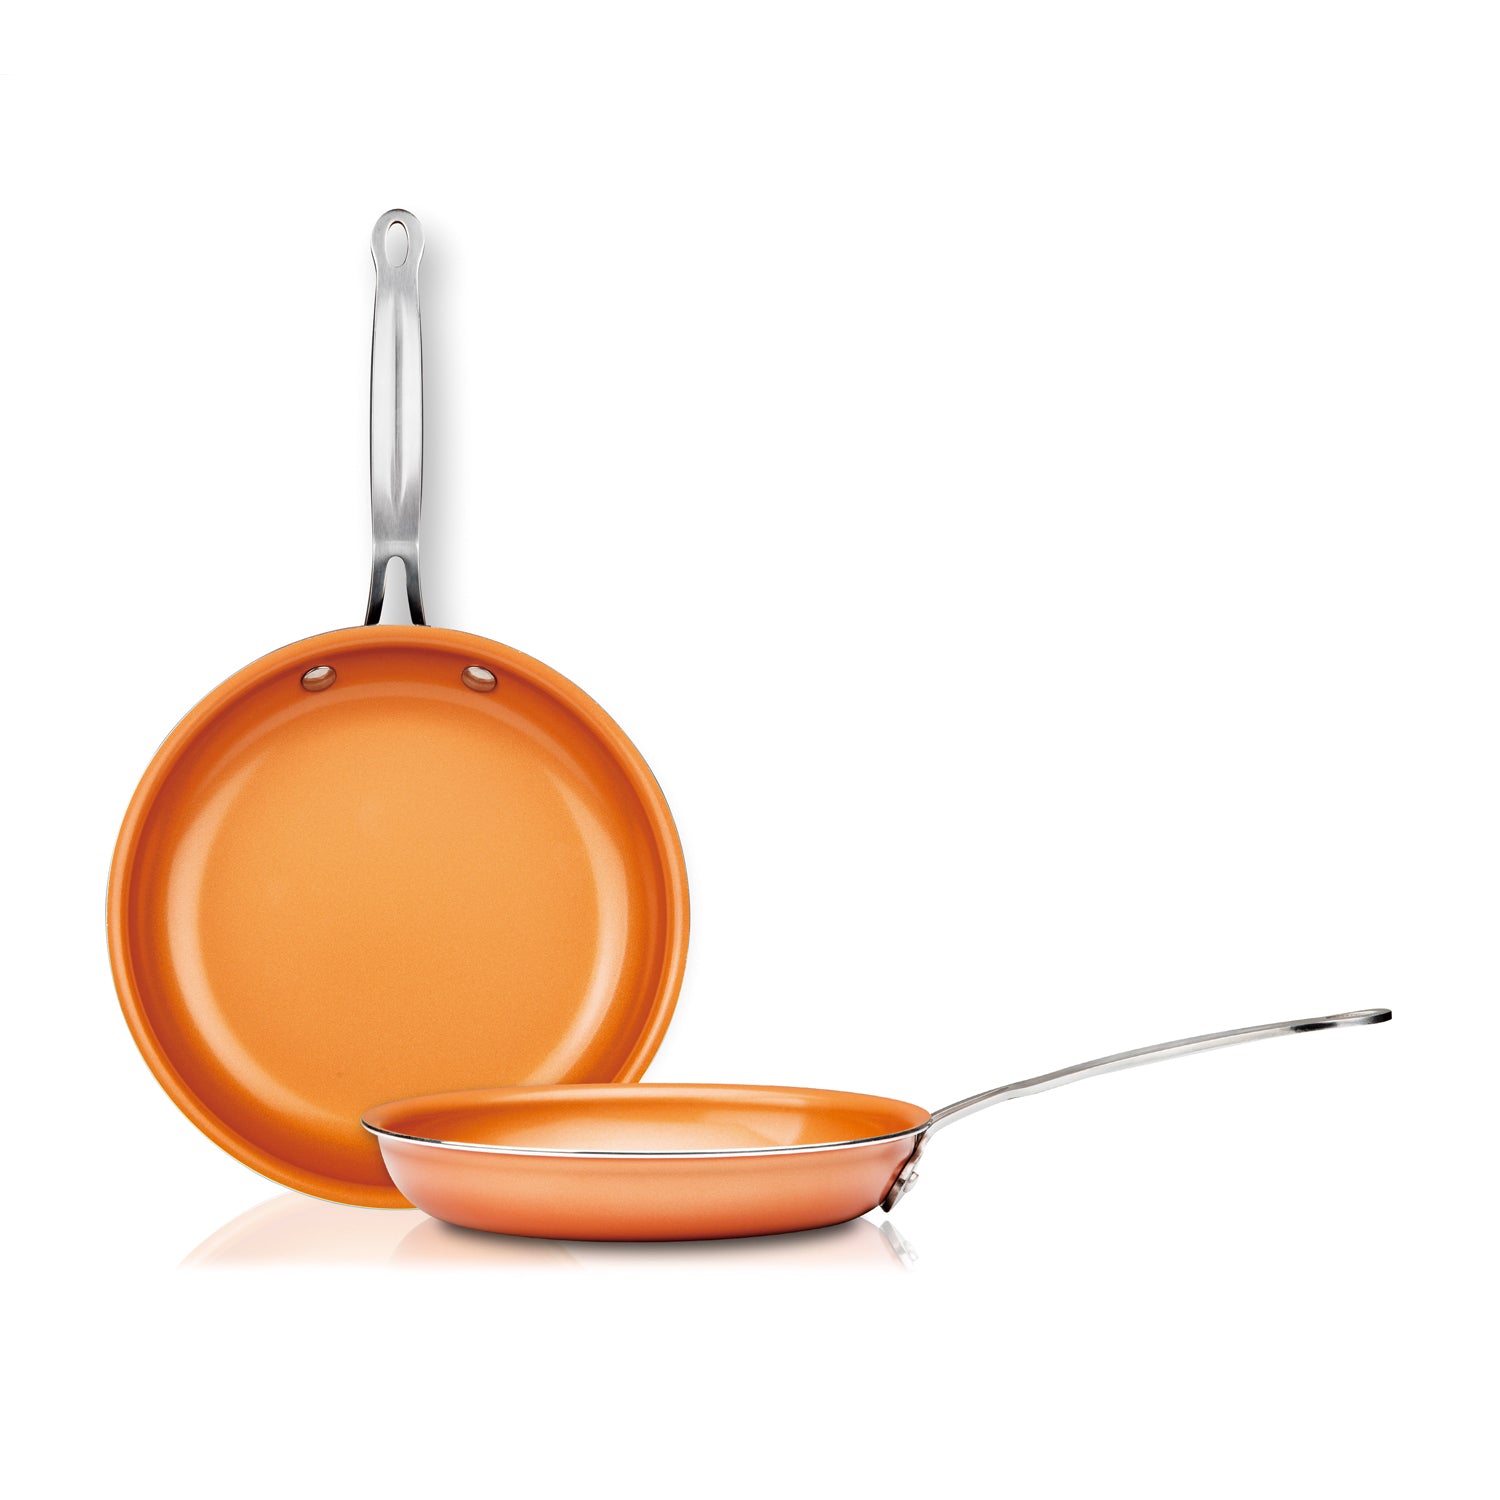 Nuwave nuwave commercial 12-inch non-stick healthy ceramic fry pan